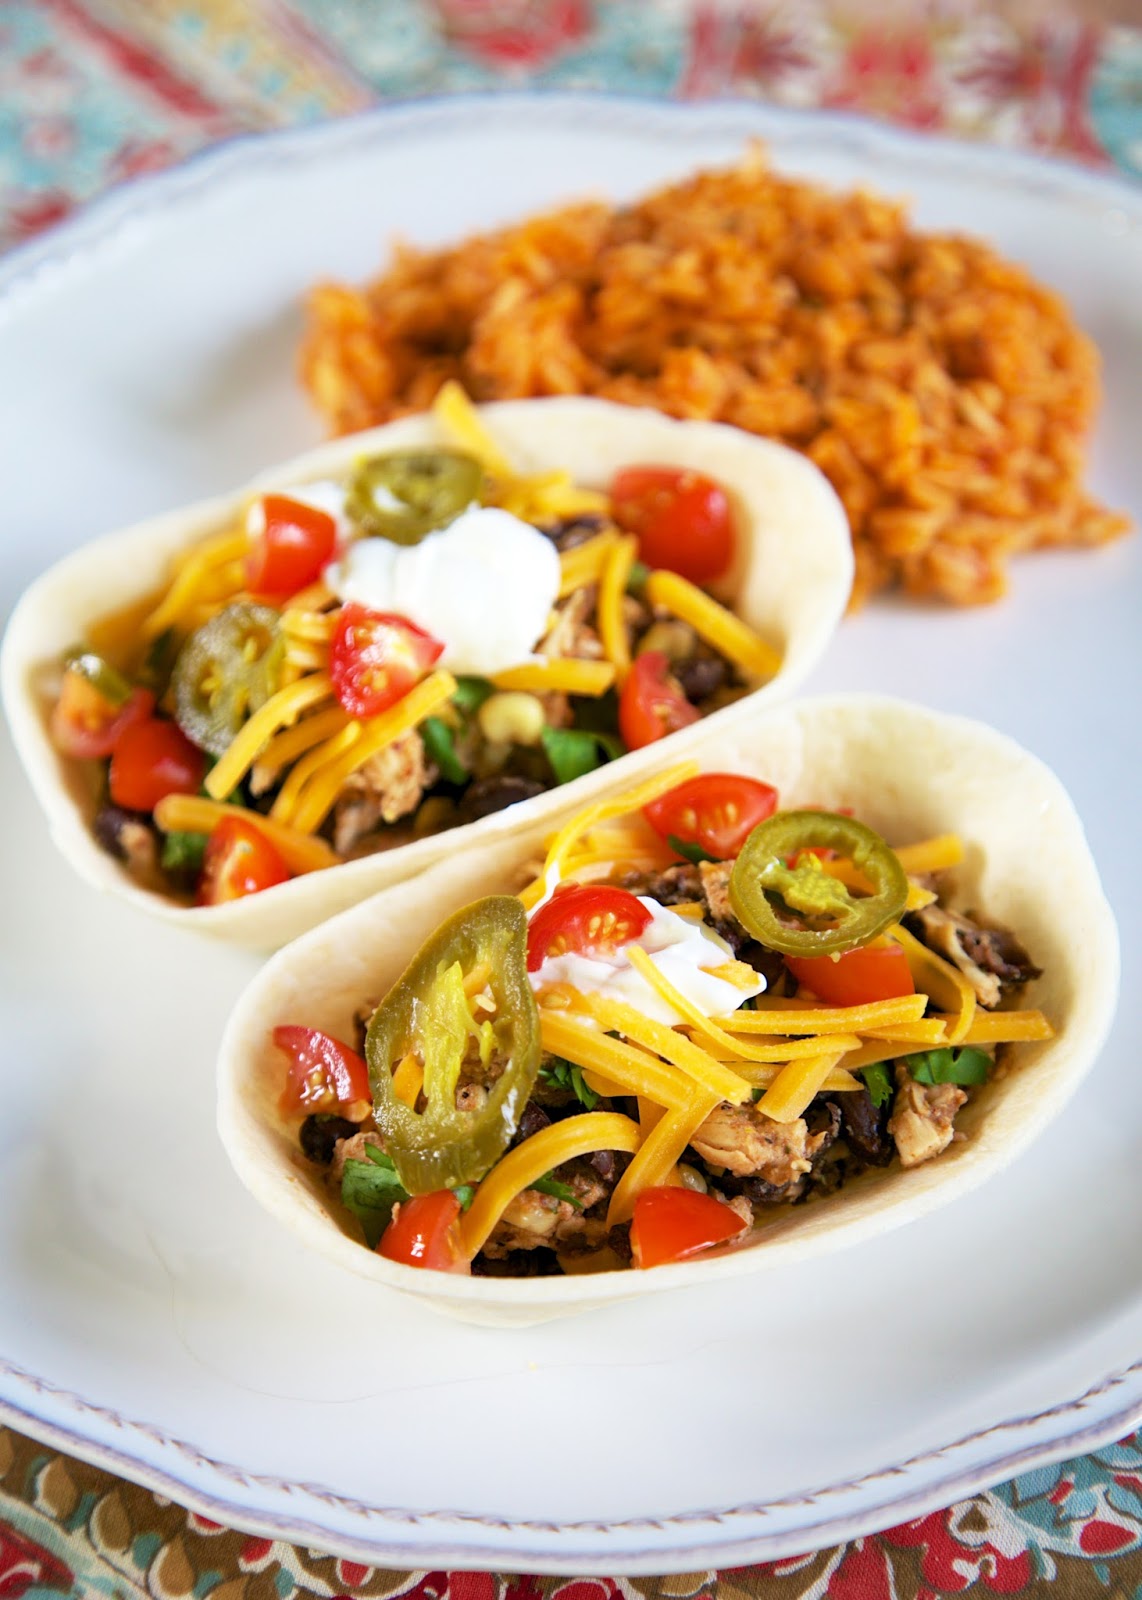 {Freezer Meal} BBQ Chicken Tacos Recipe - chicken, bbq seasoning, garlic seasoning, black beans, corn, tortillas. Throw everything in a freezer bag and freeze for later. Cook from frozen in the slow cooker.